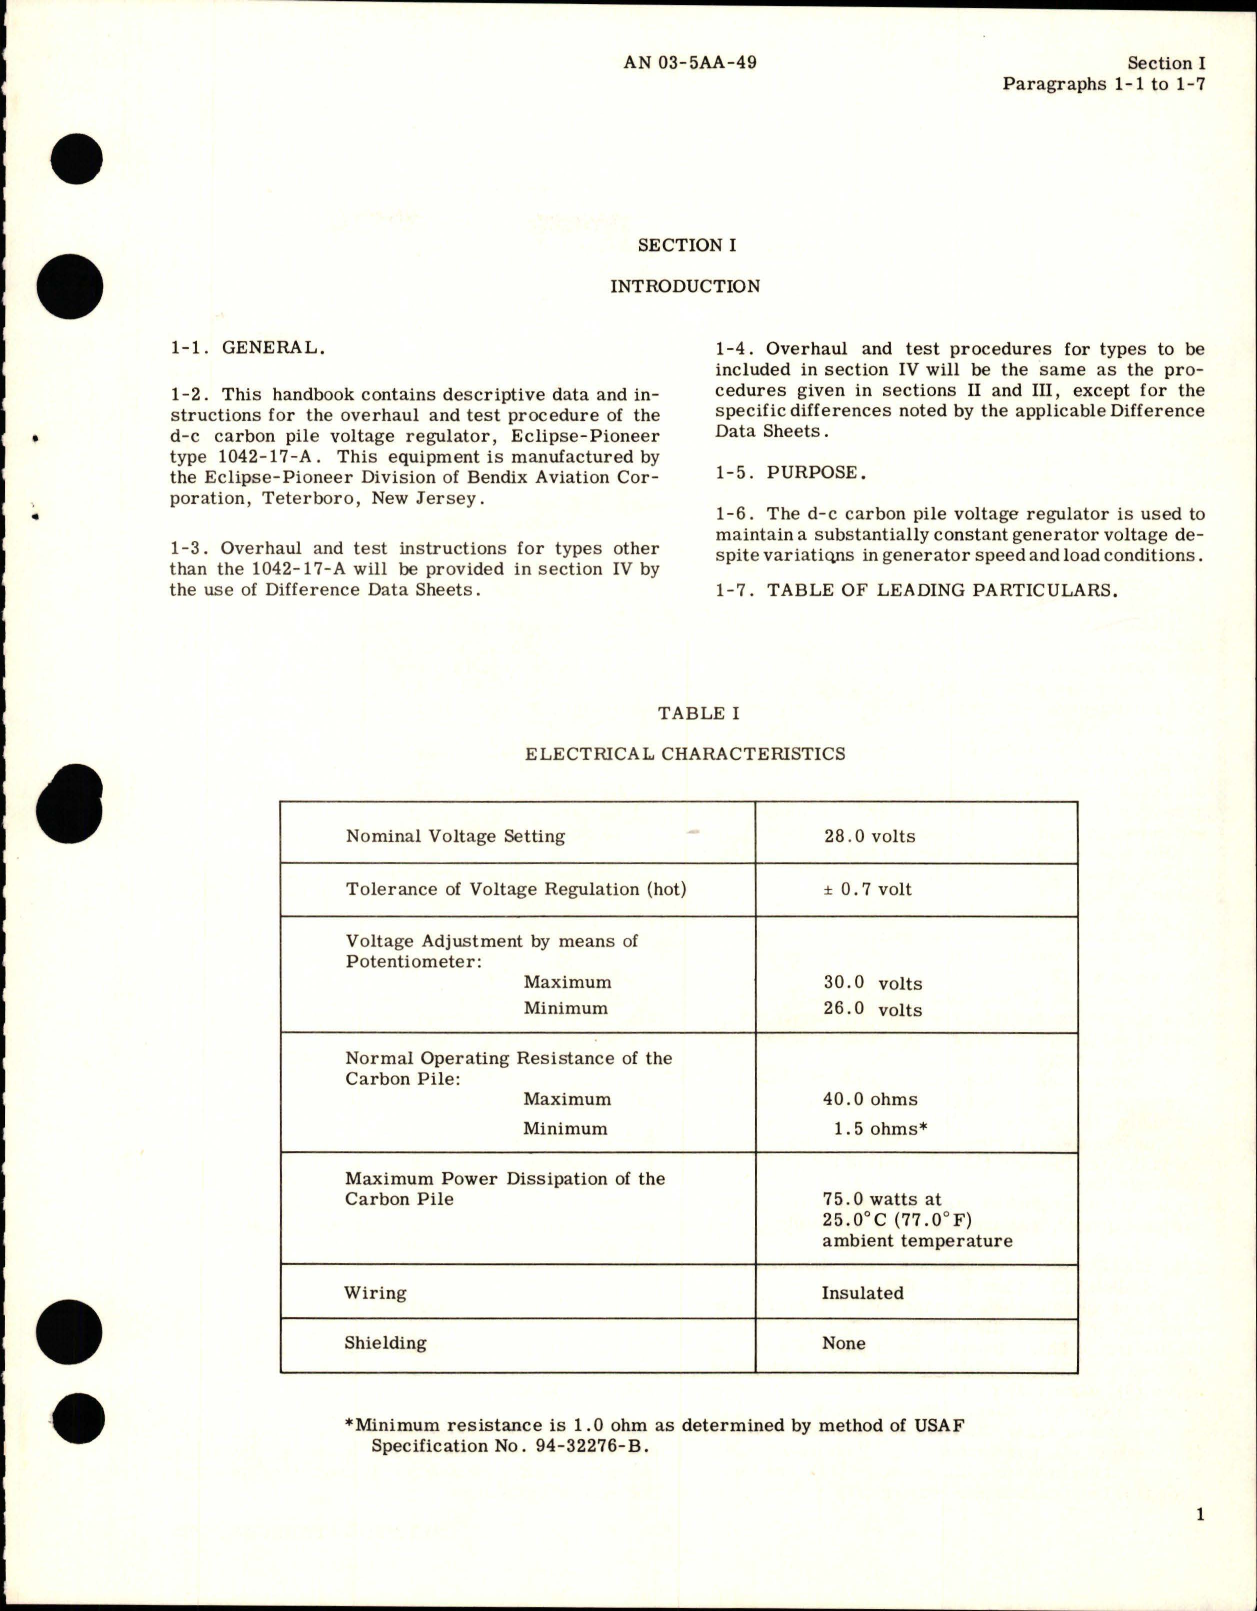 Sample page 5 from AirCorps Library document: Overhaul Instructions for D-C Carbon Pile Voltage Regulator - Type 1042-17-A